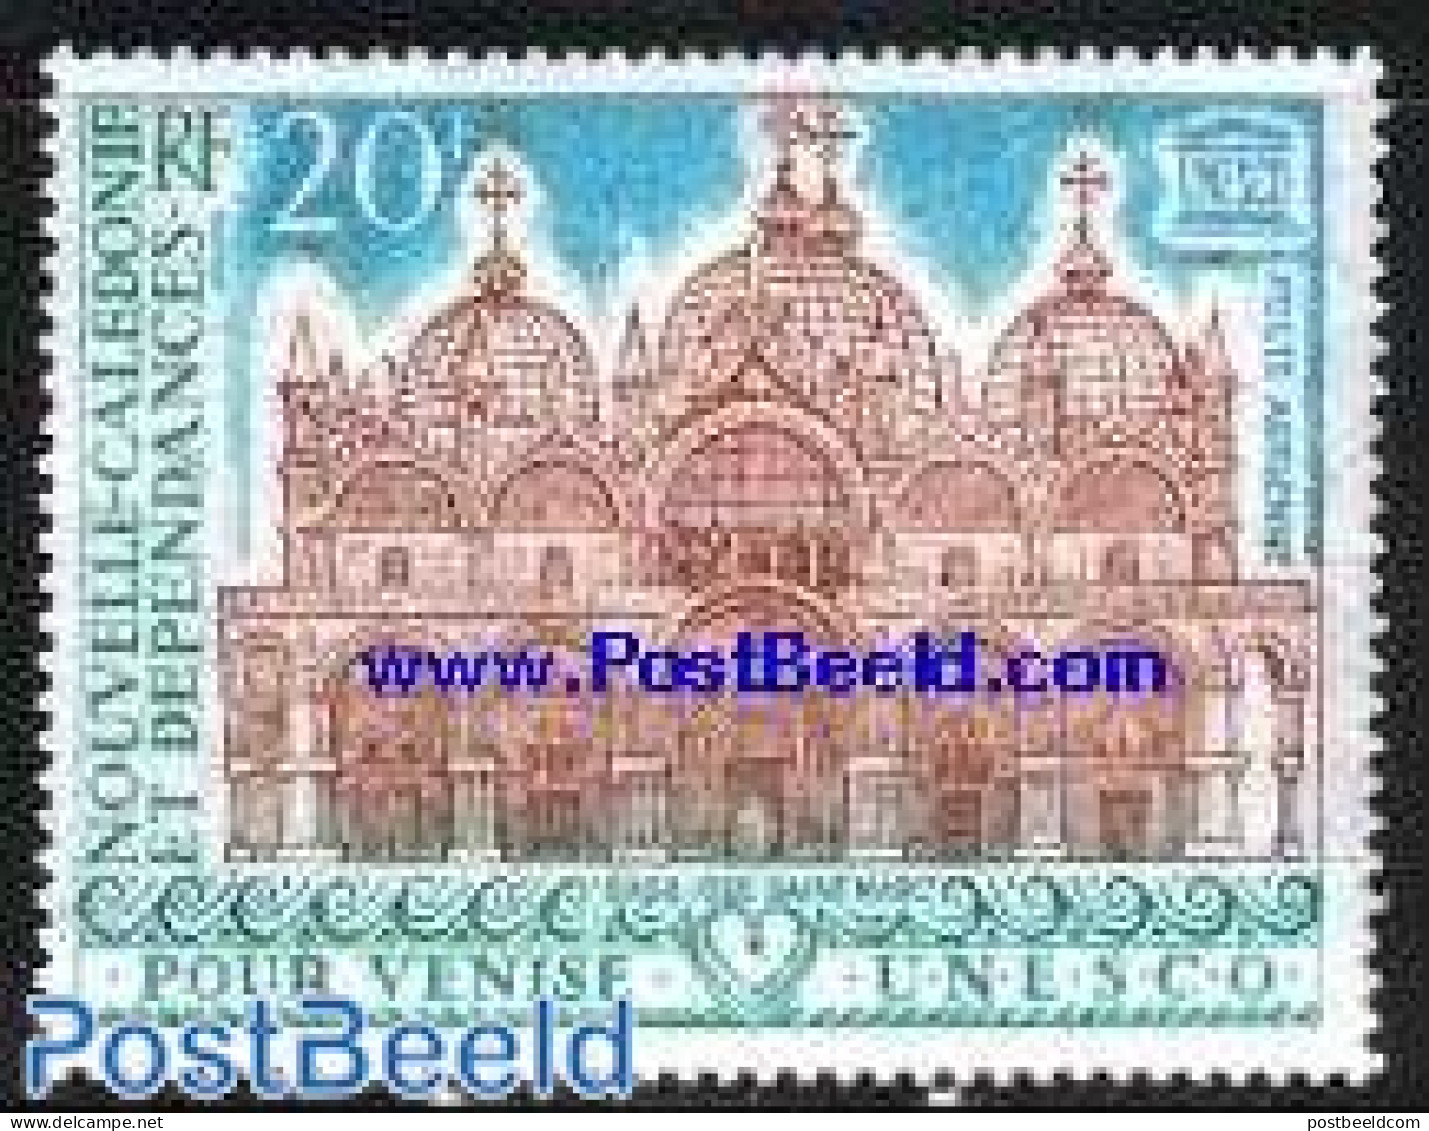 New Caledonia 1972 Save Venice 1v, Mint NH, History - Religion - Various - Unesco - Churches, Temples, Mosques, Synago.. - Unused Stamps